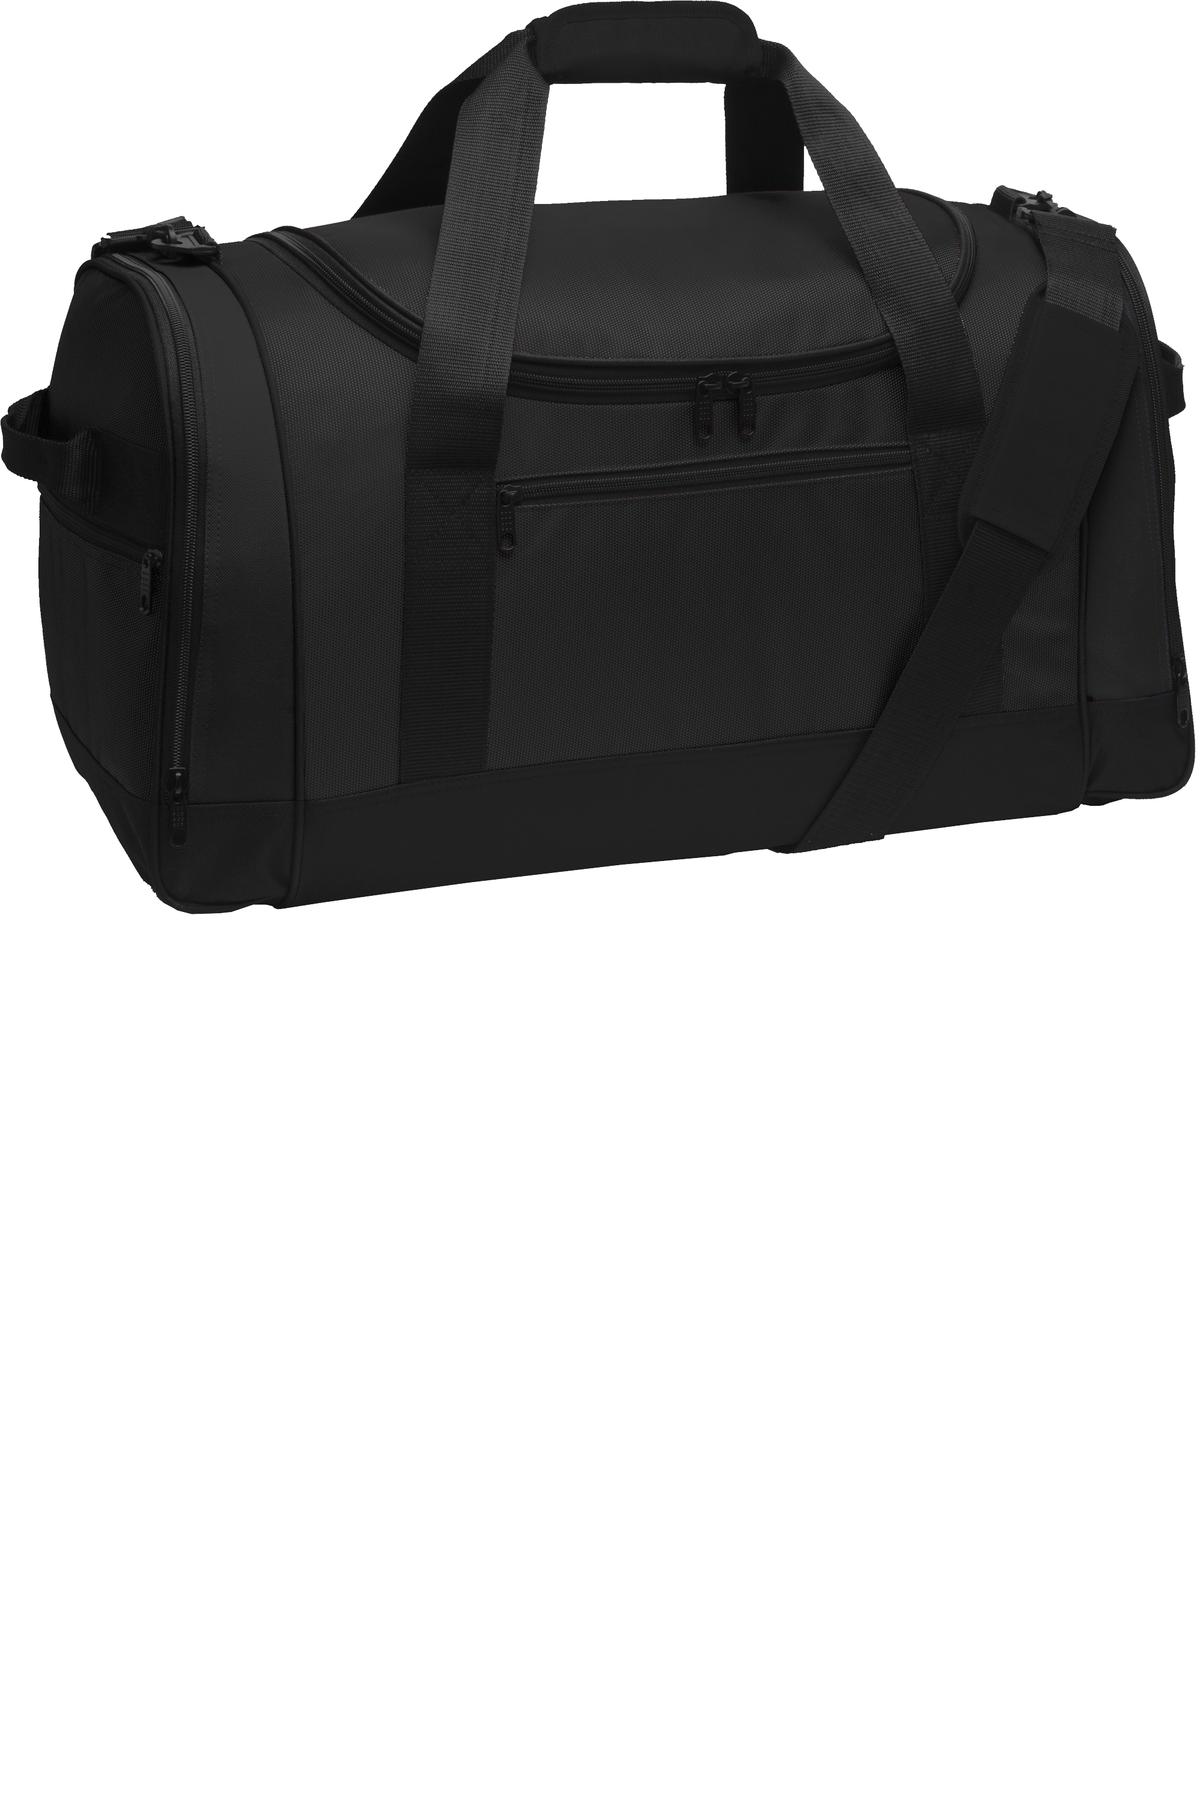 Port Authority Voyager Sports Duffel-Port Authority